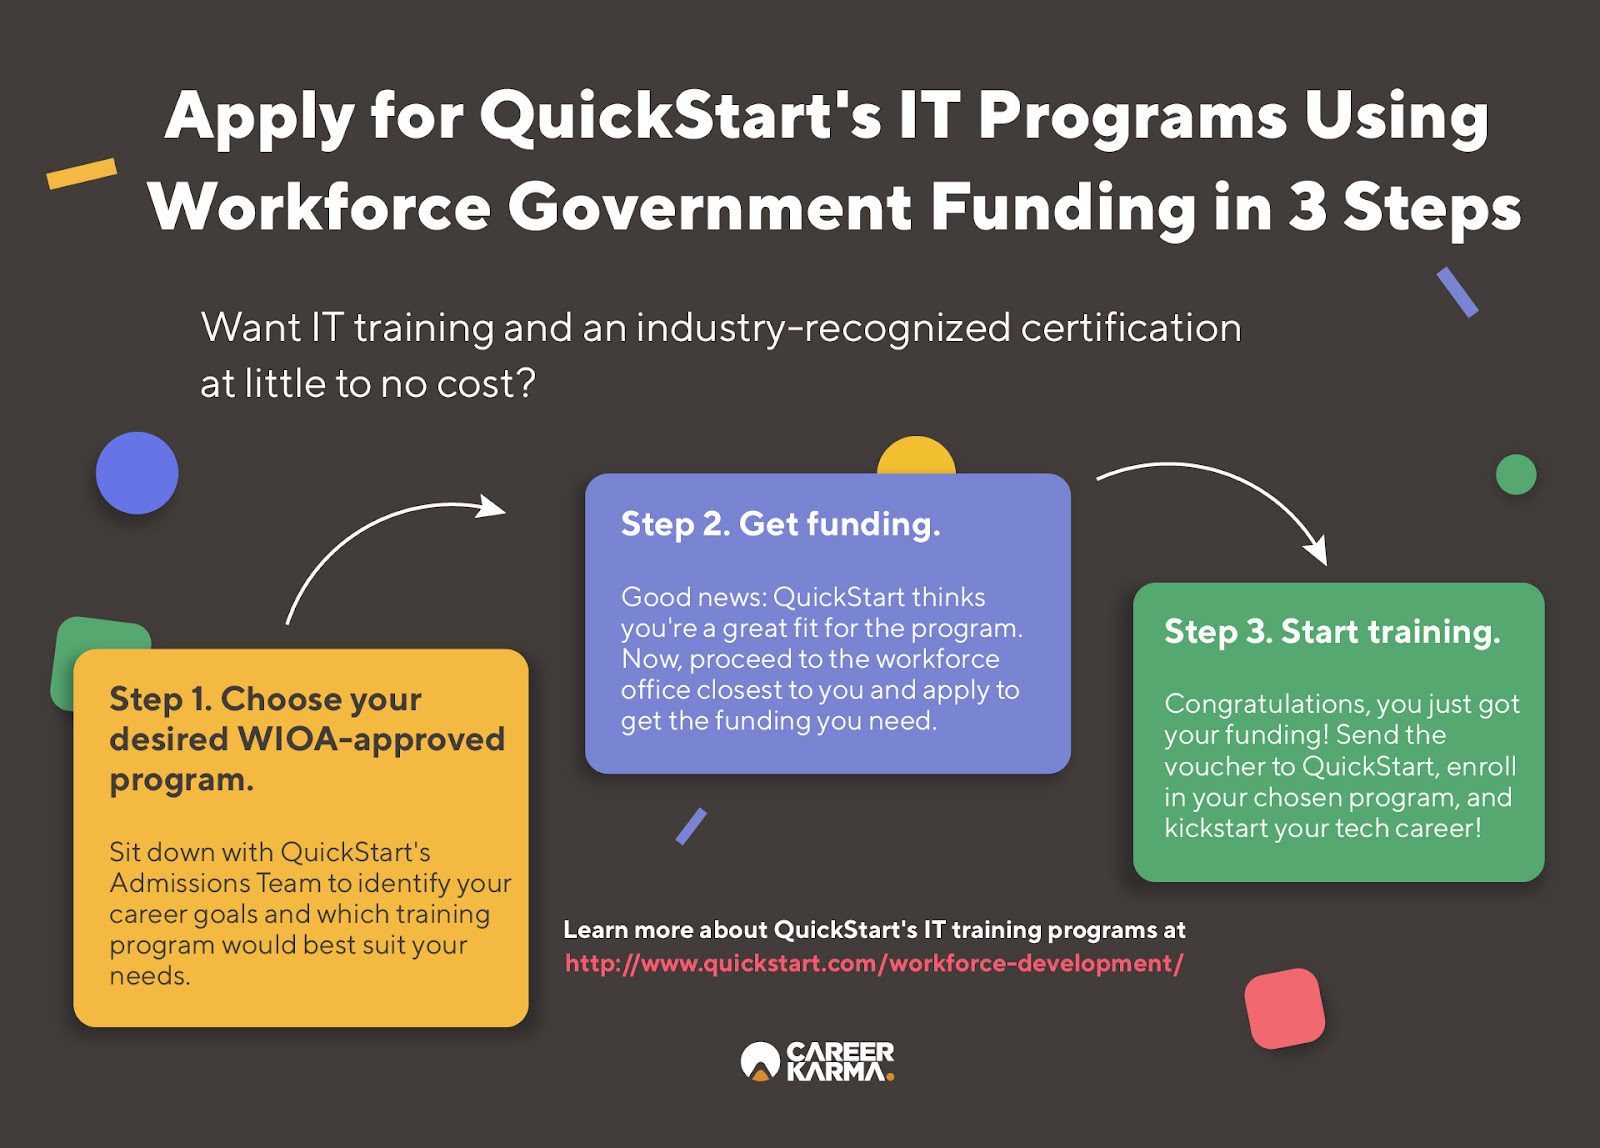 An infographic listing a step-by-step guide to applying for QuickStart’s Workforce Government Programs